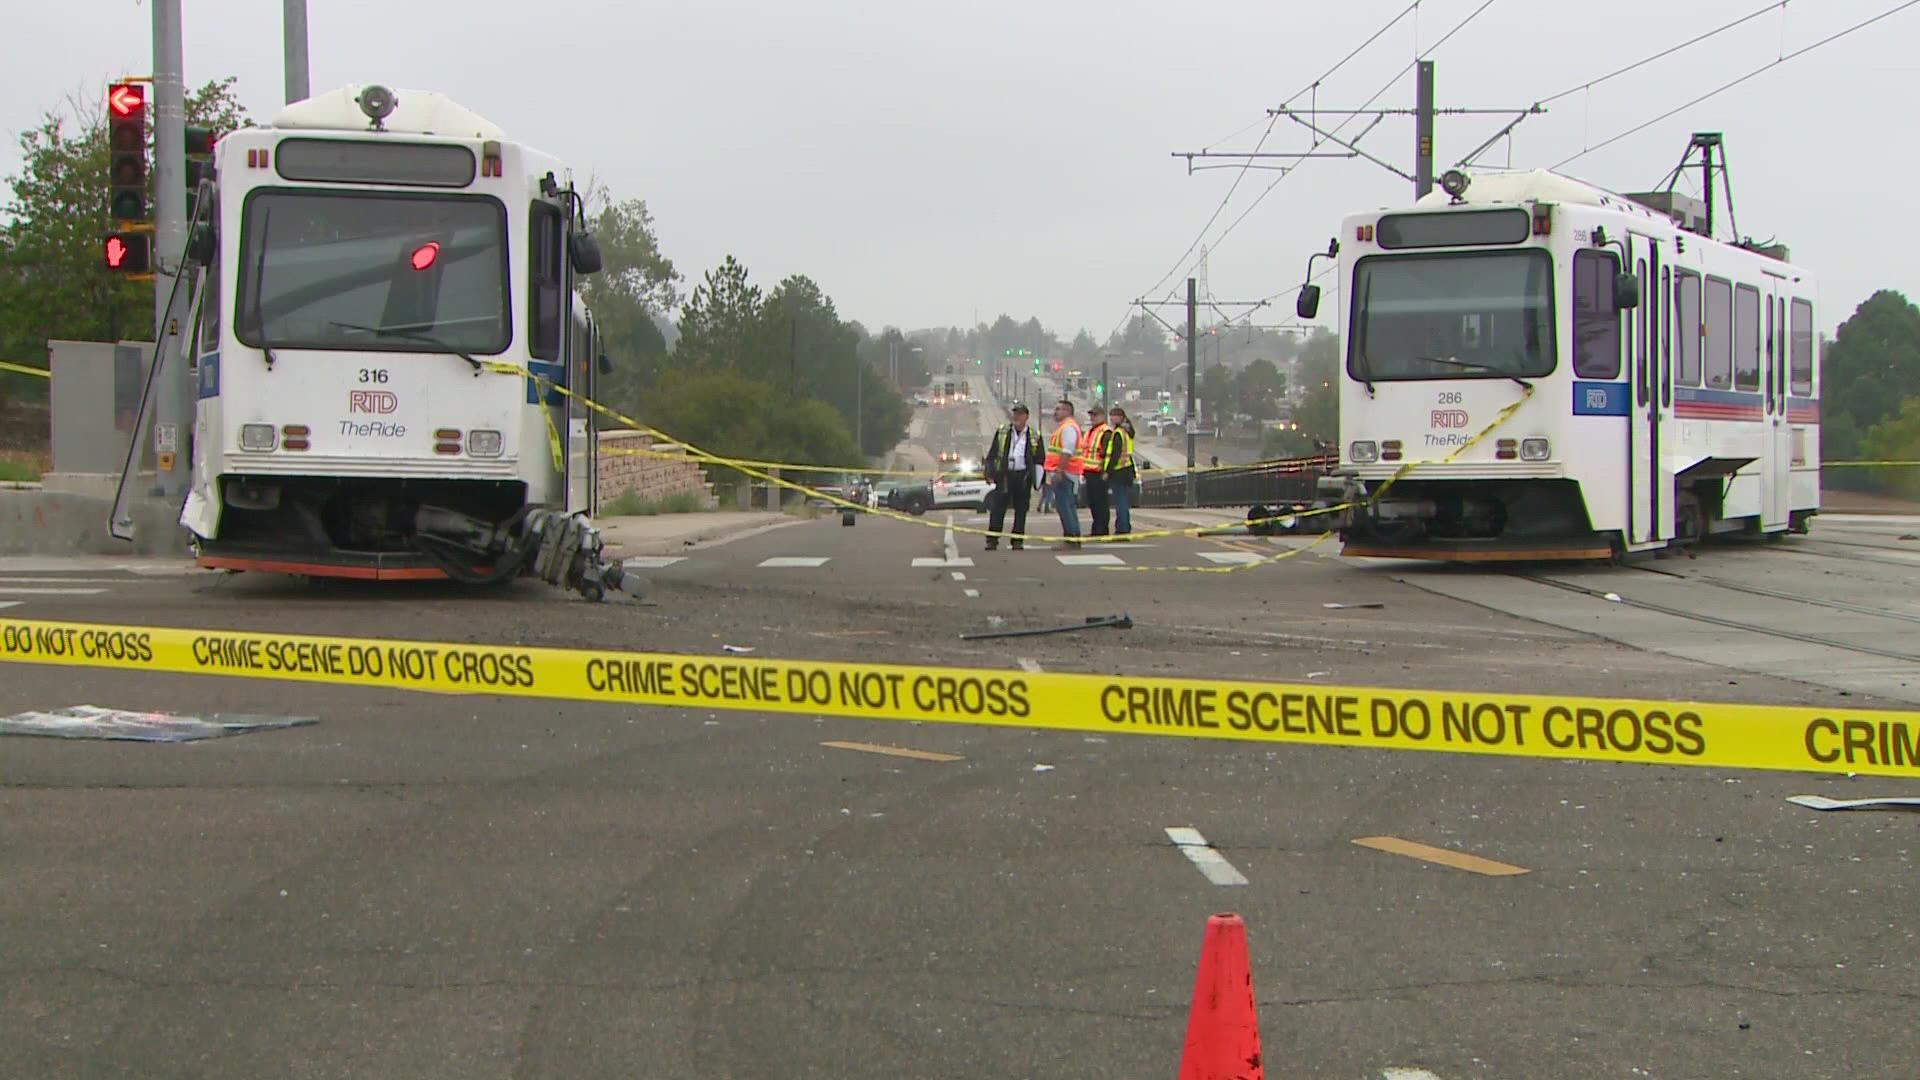 RTD is planning on resuming service on the R Line by the end of the month following a train derailment on Sept. 21.